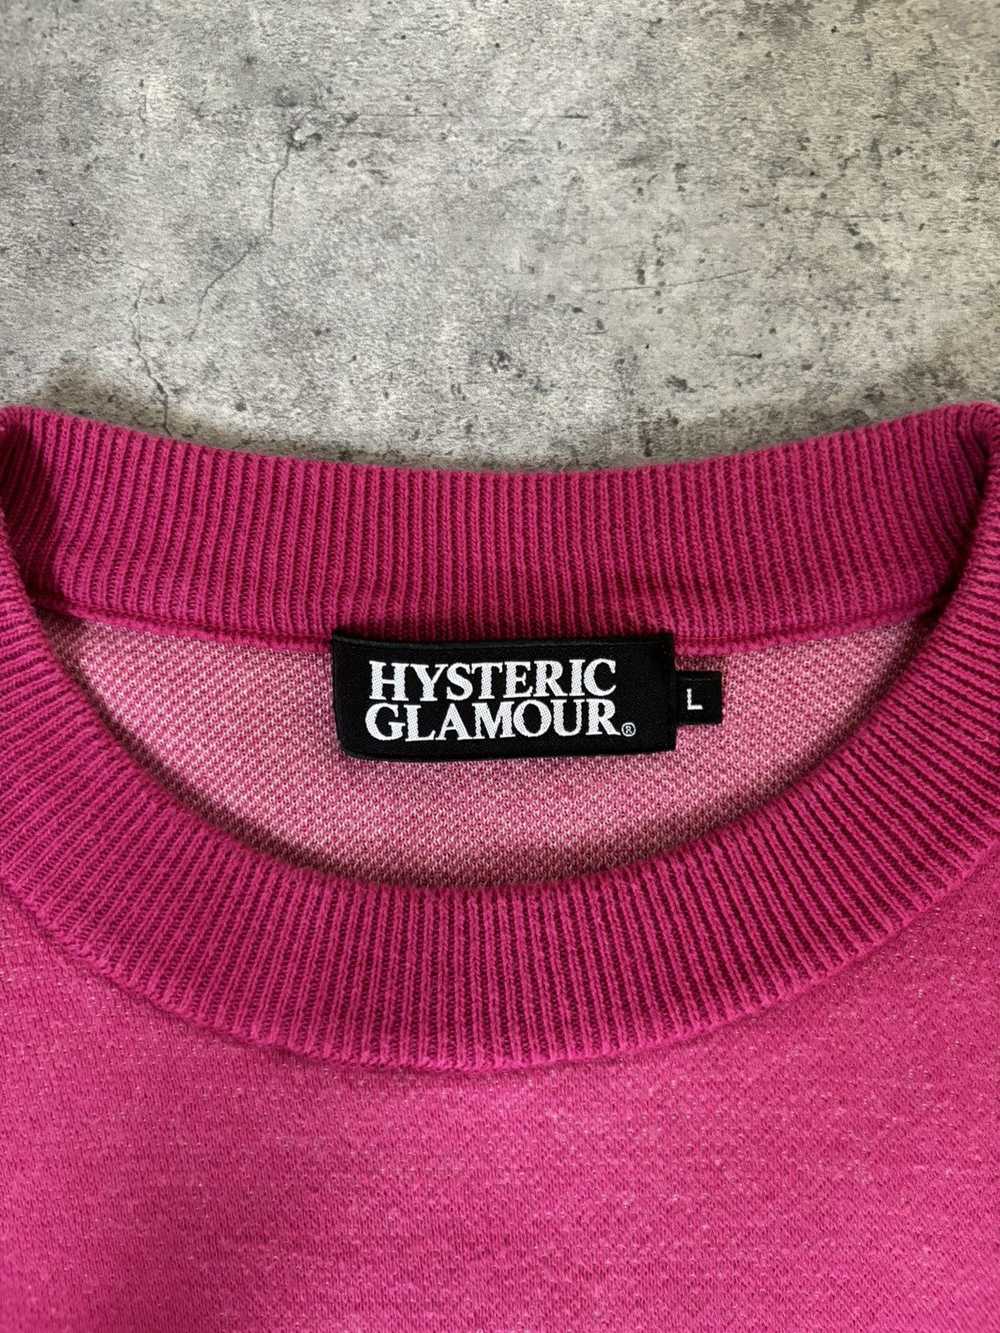 Hysteric Glamour Sid Vicious Knit Sweater - image 2